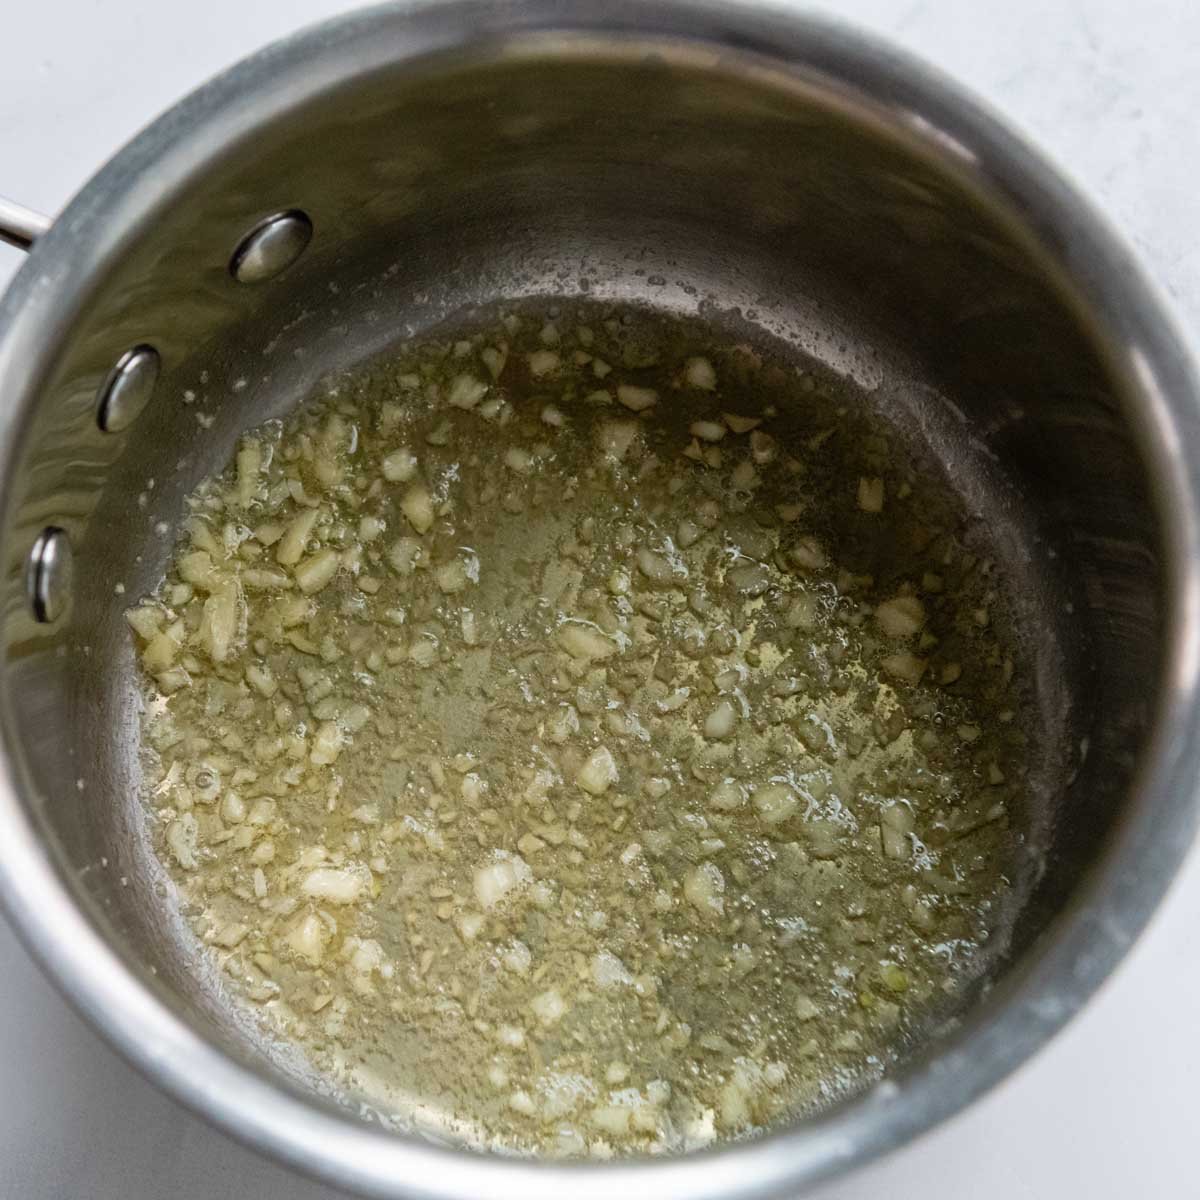 garlic being sauted in butter.